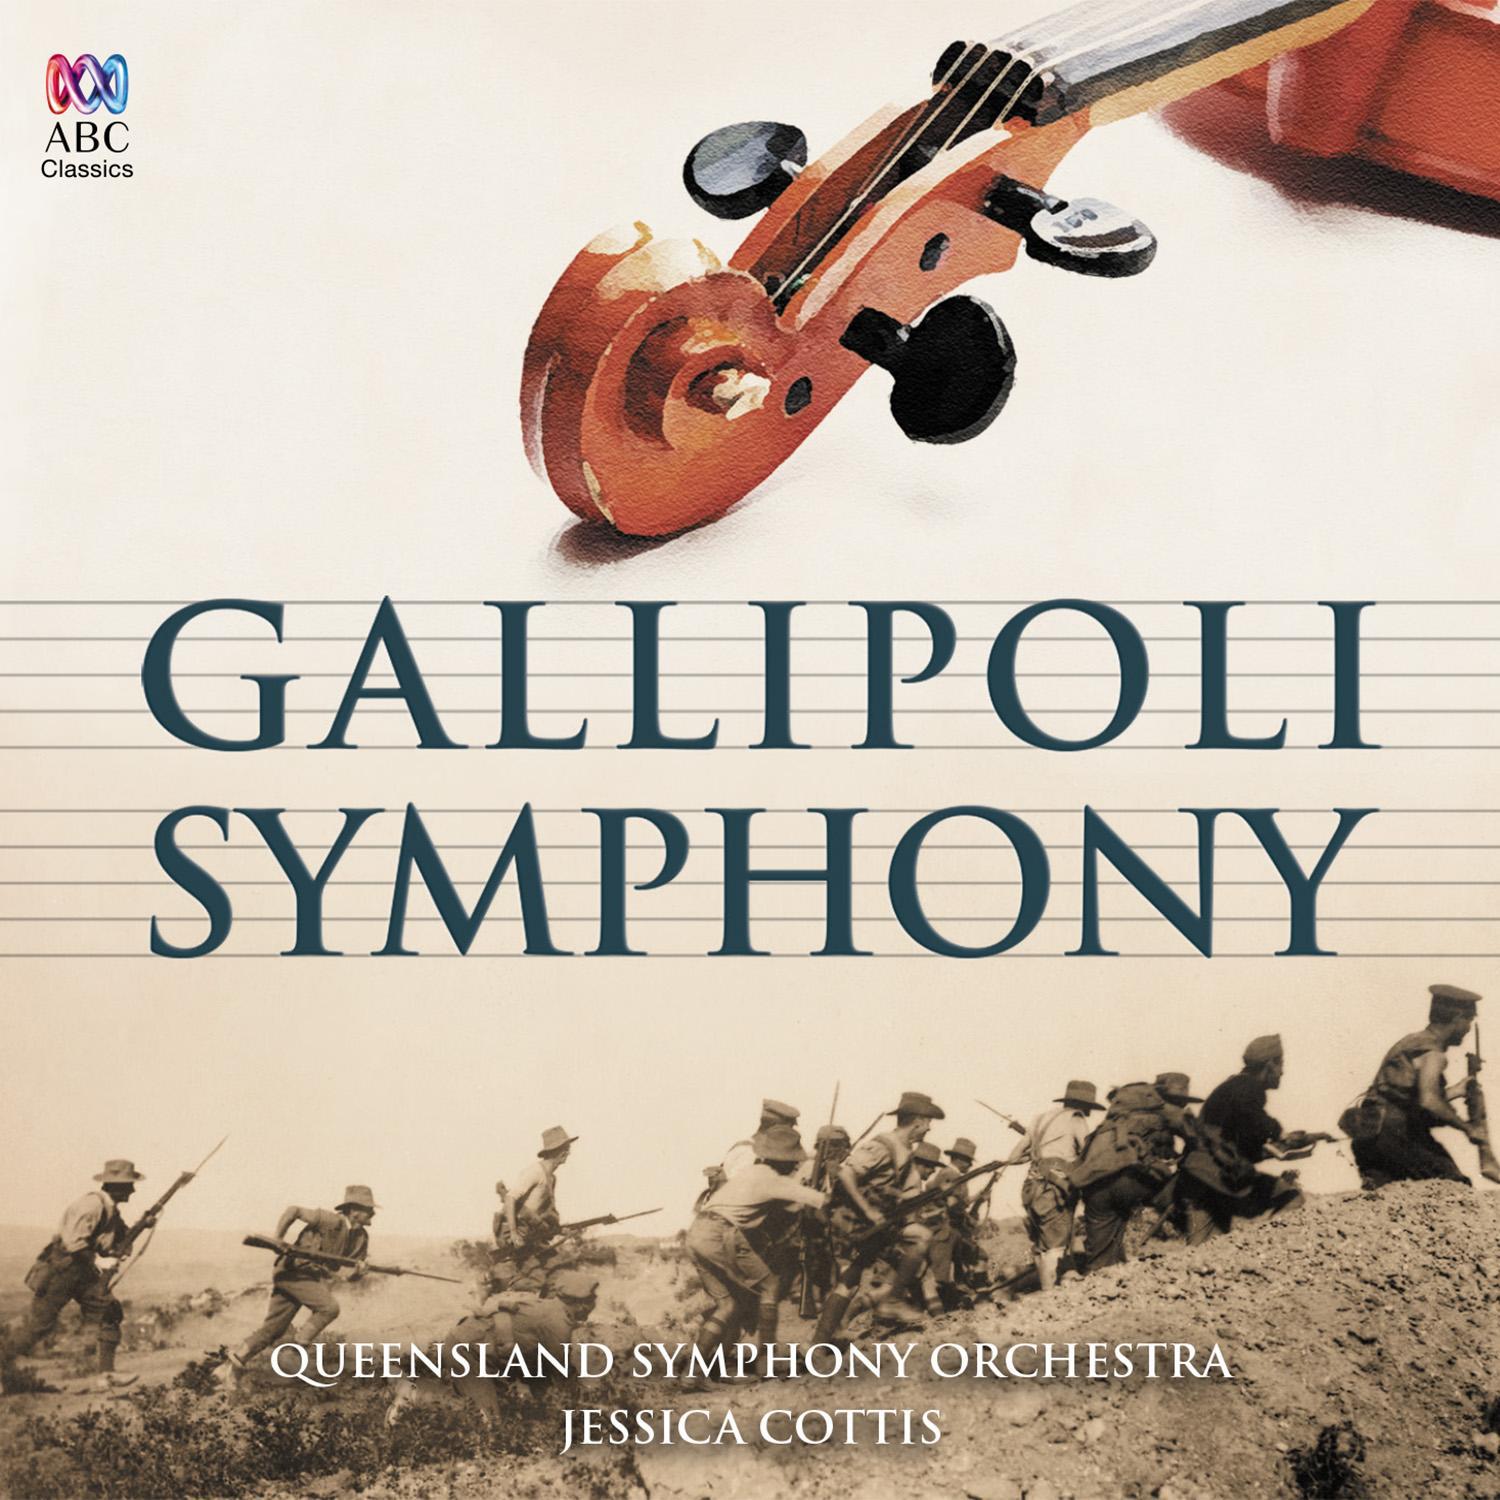 Ross Harris - Gallipoli Symphony: VII. God Pity Us Poor Soldiers